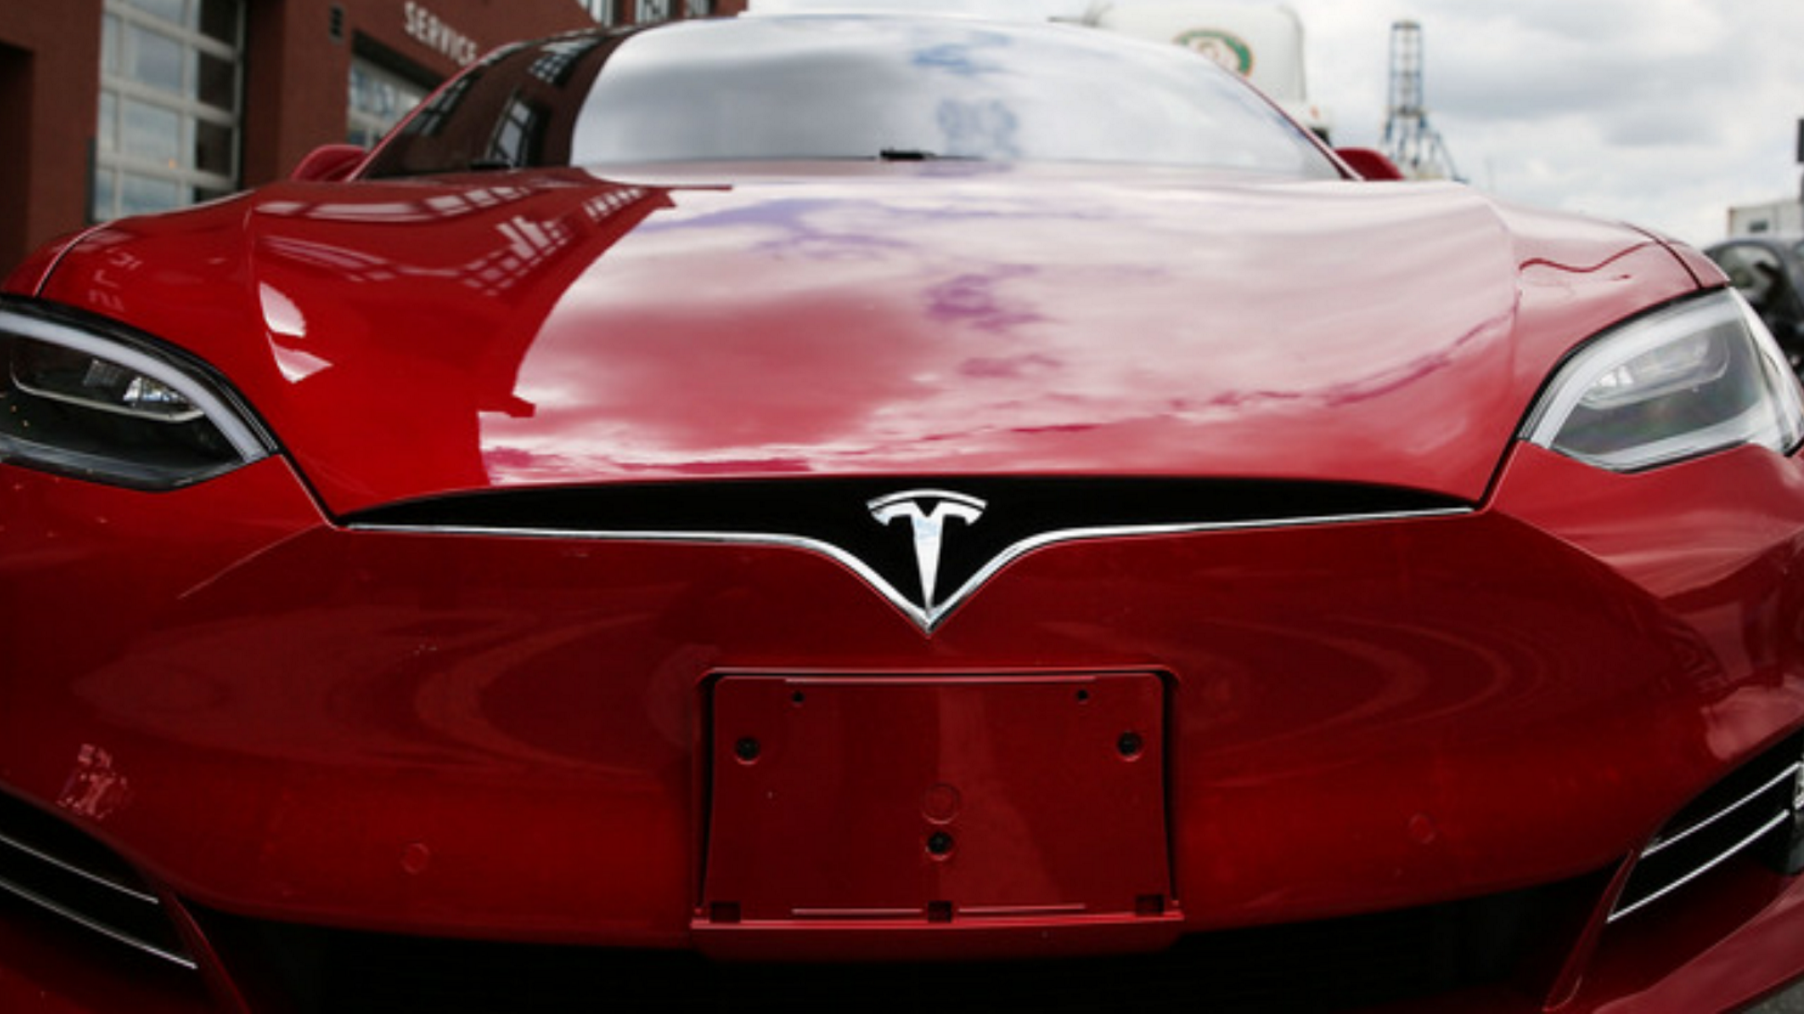 Tesla's Q3 Numbers Will Record Deliveries Wreck The Statement